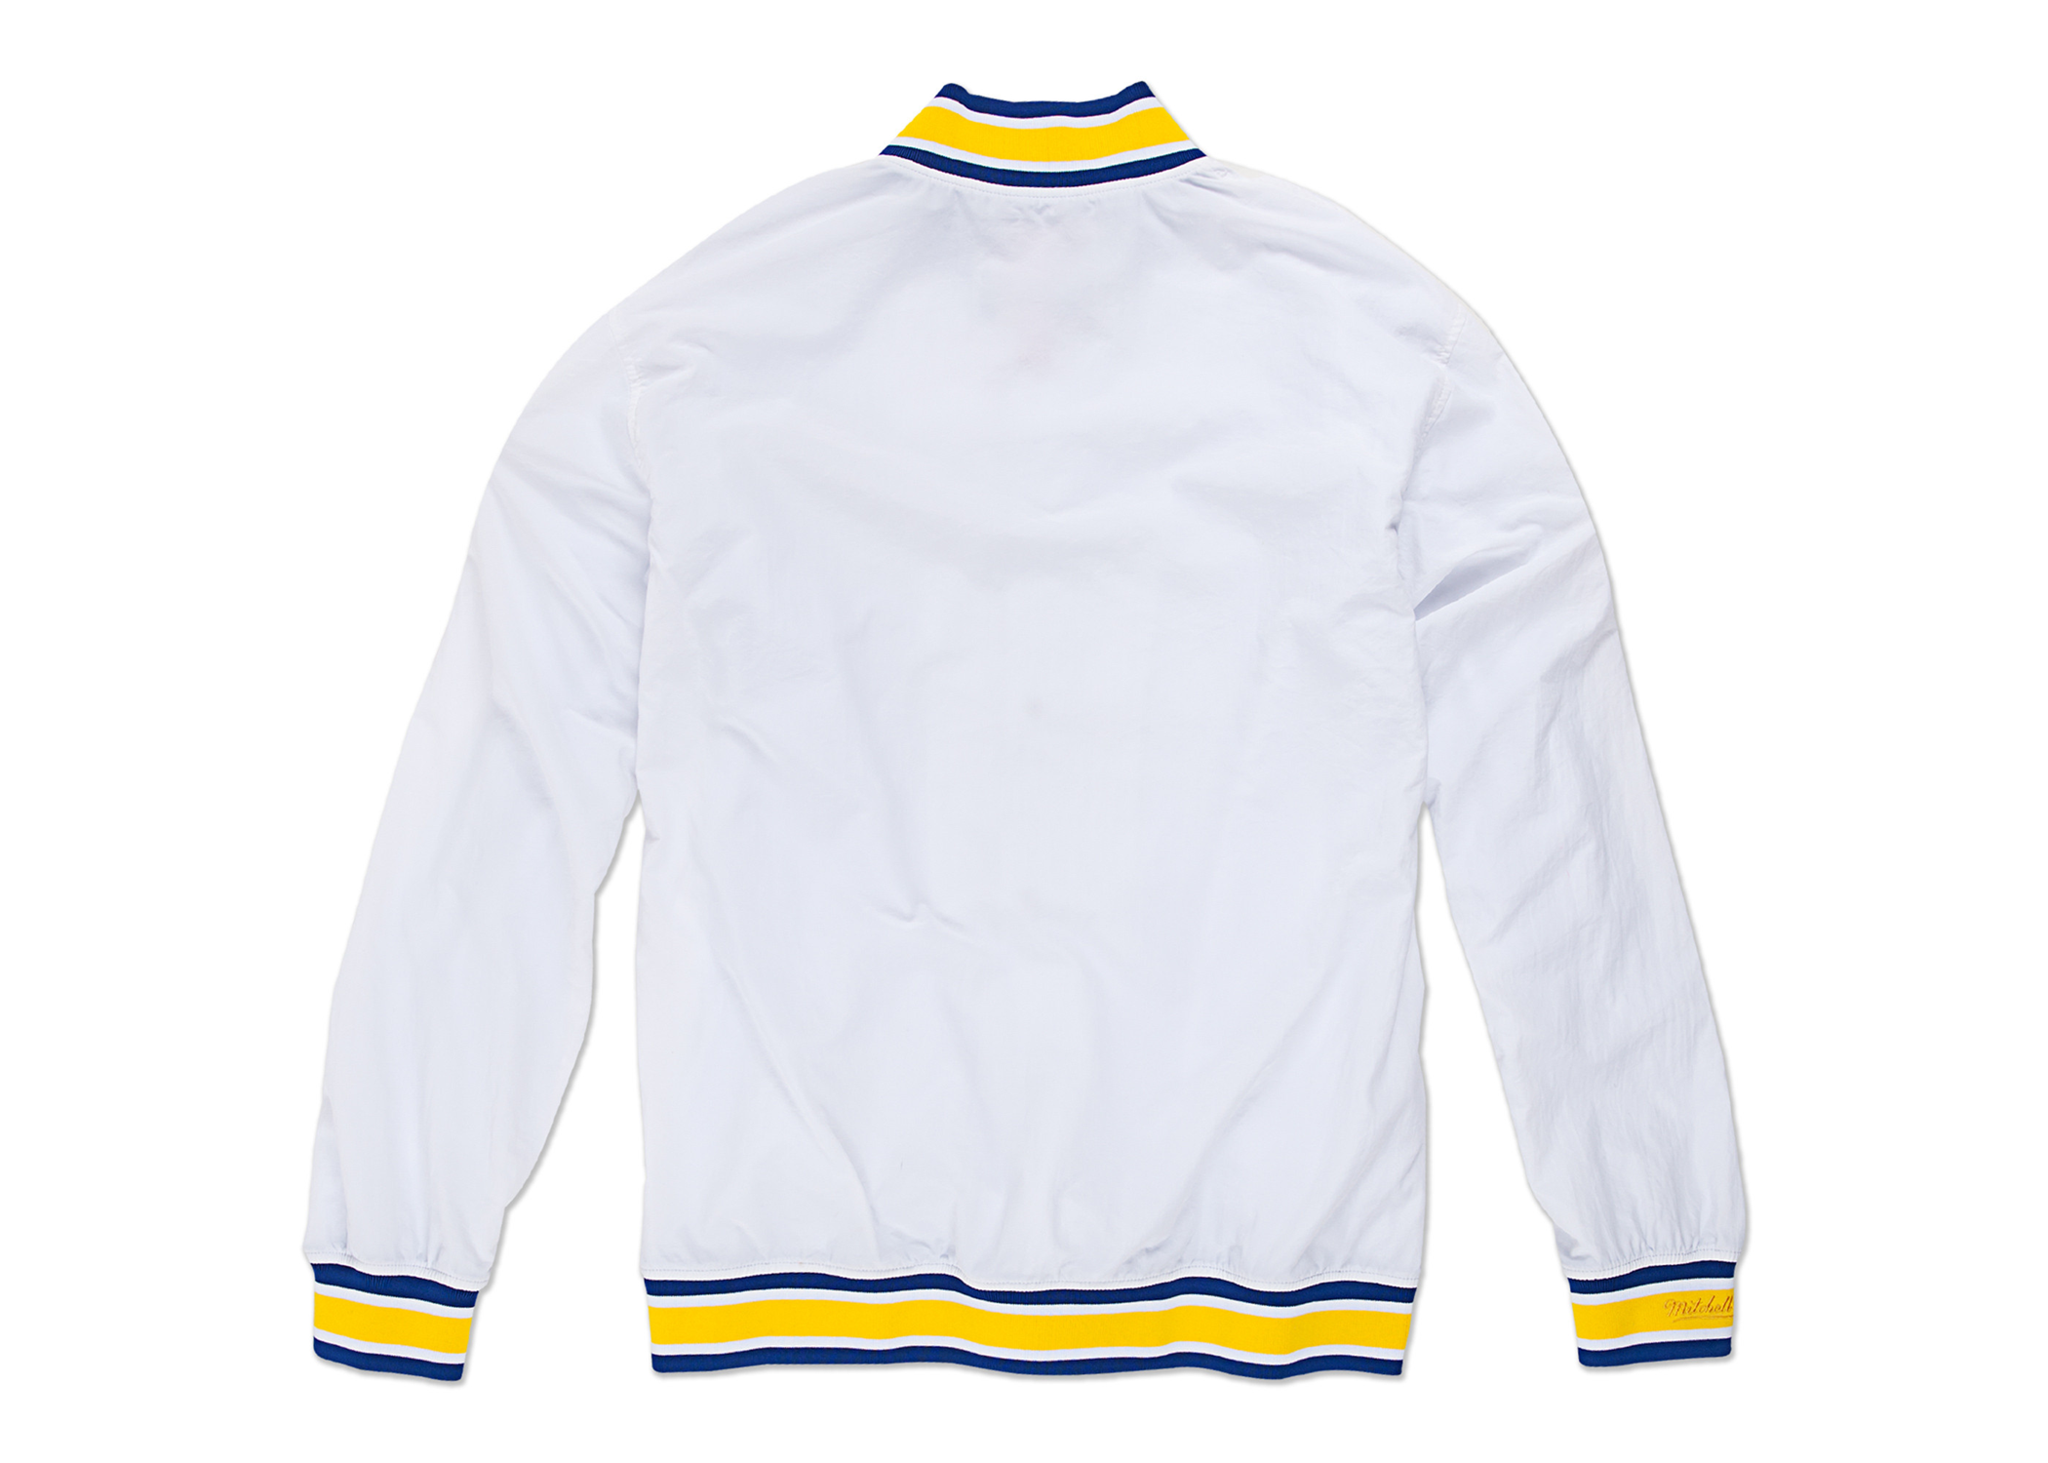 Mitchell & Ness Golden State Warriors "Nothing But Net" Python Warm Up Jacket (White)